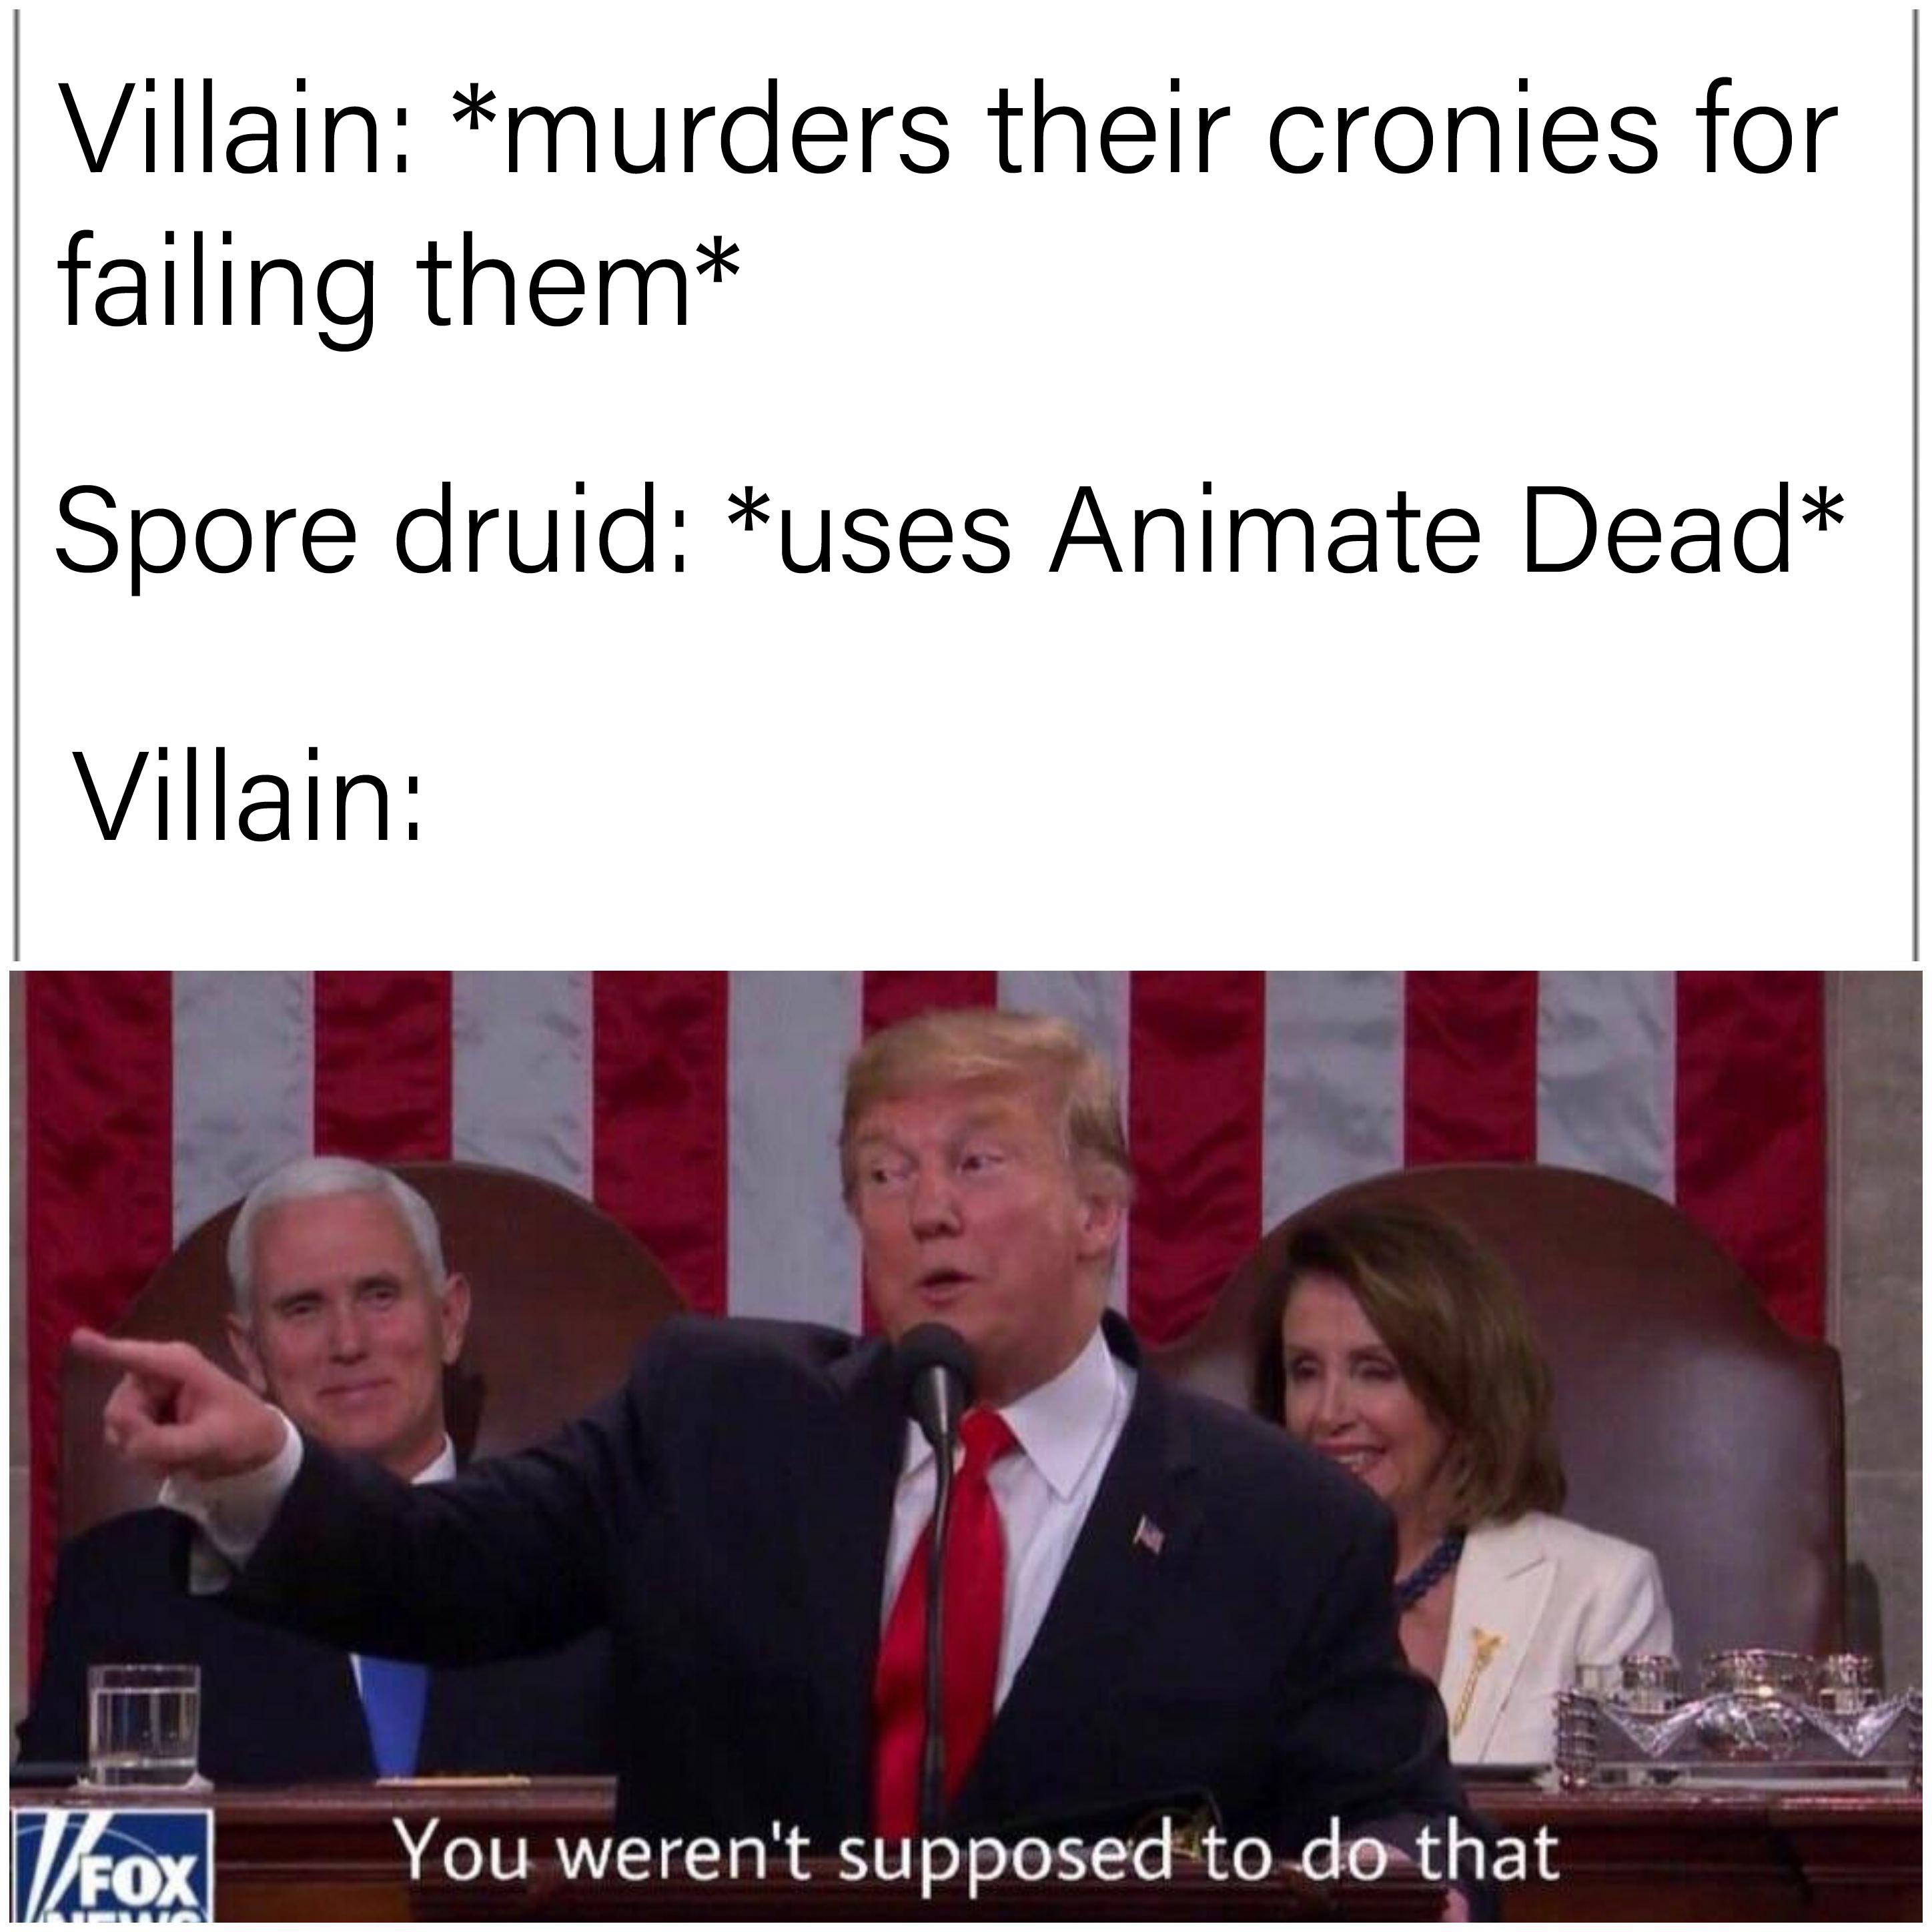 lotr denethor bad - Villain murders their cronies for failing them Spore druid uses Animate Dead Villain Veox You weren't supposed to do that